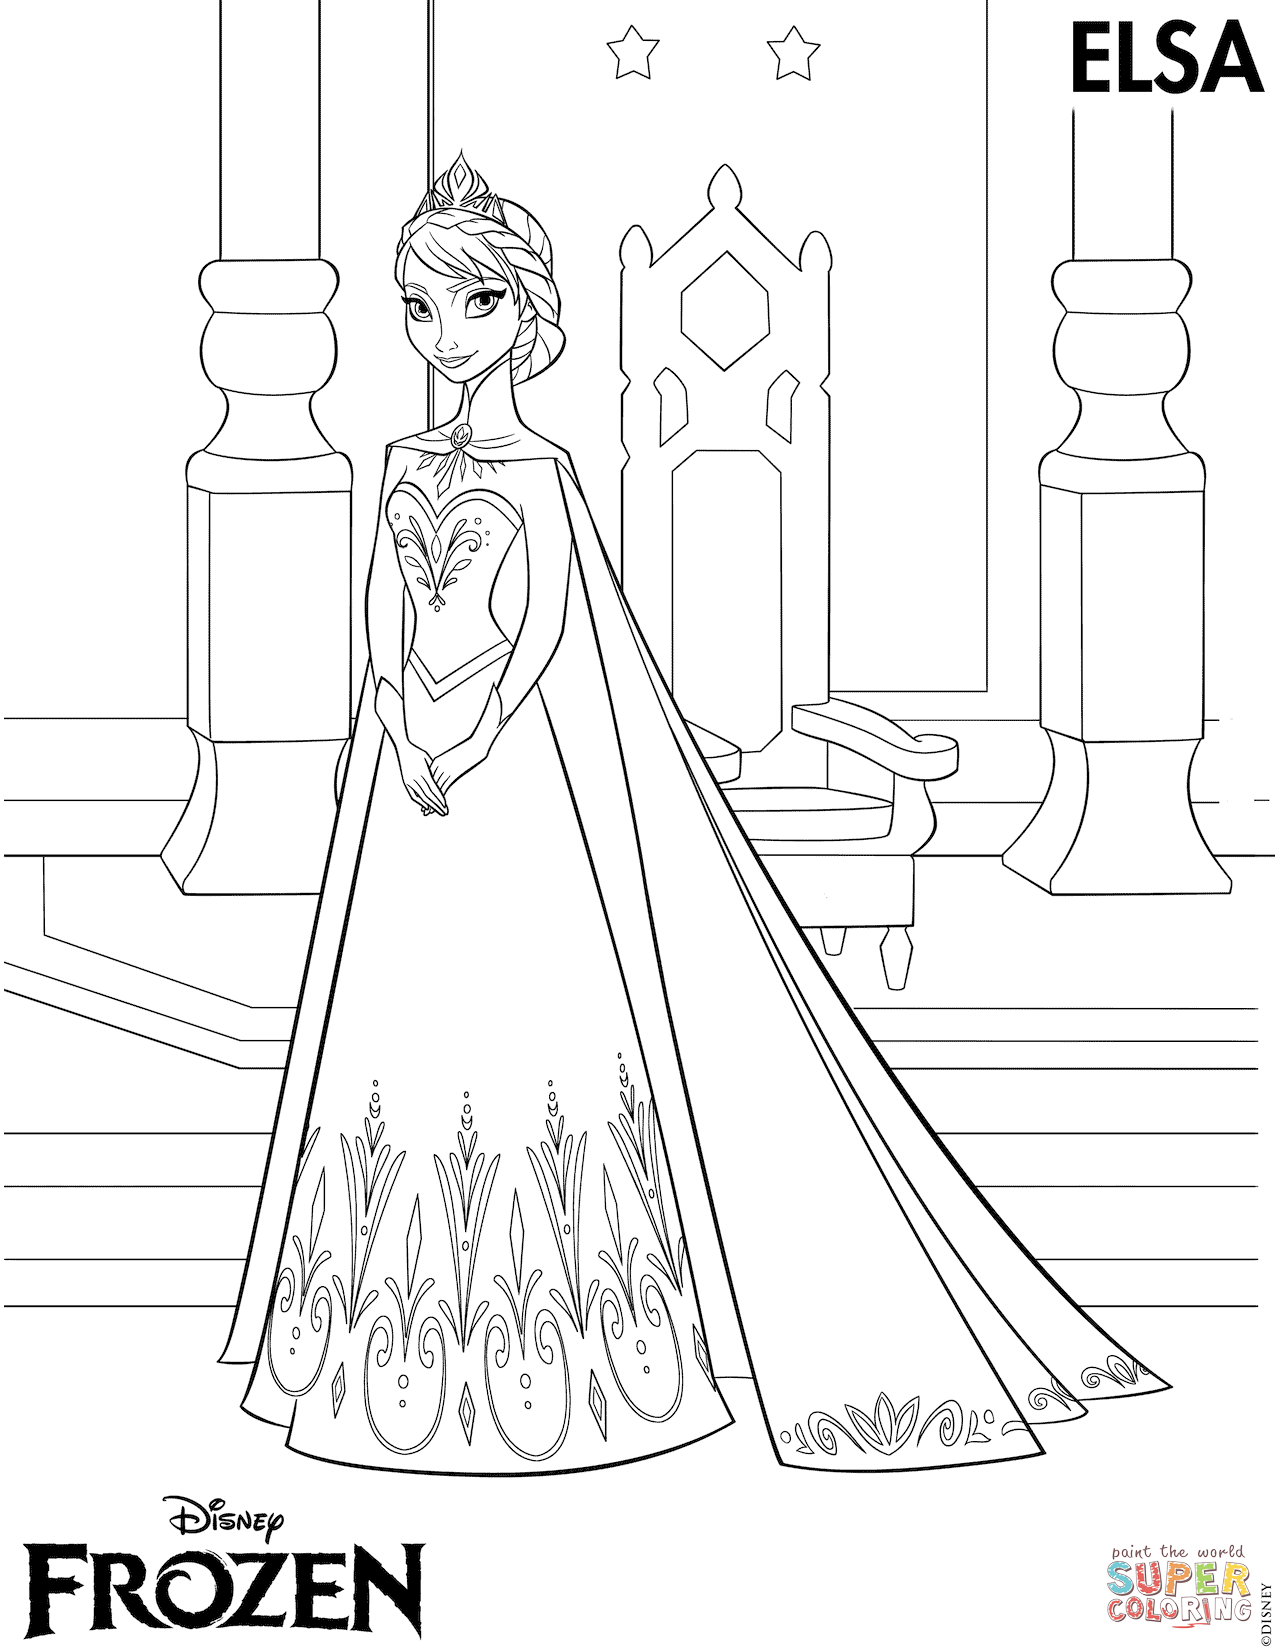 The Frozen Coloring Pages | Free Coloring Pages - Free Printable Frozen Coloring Pages